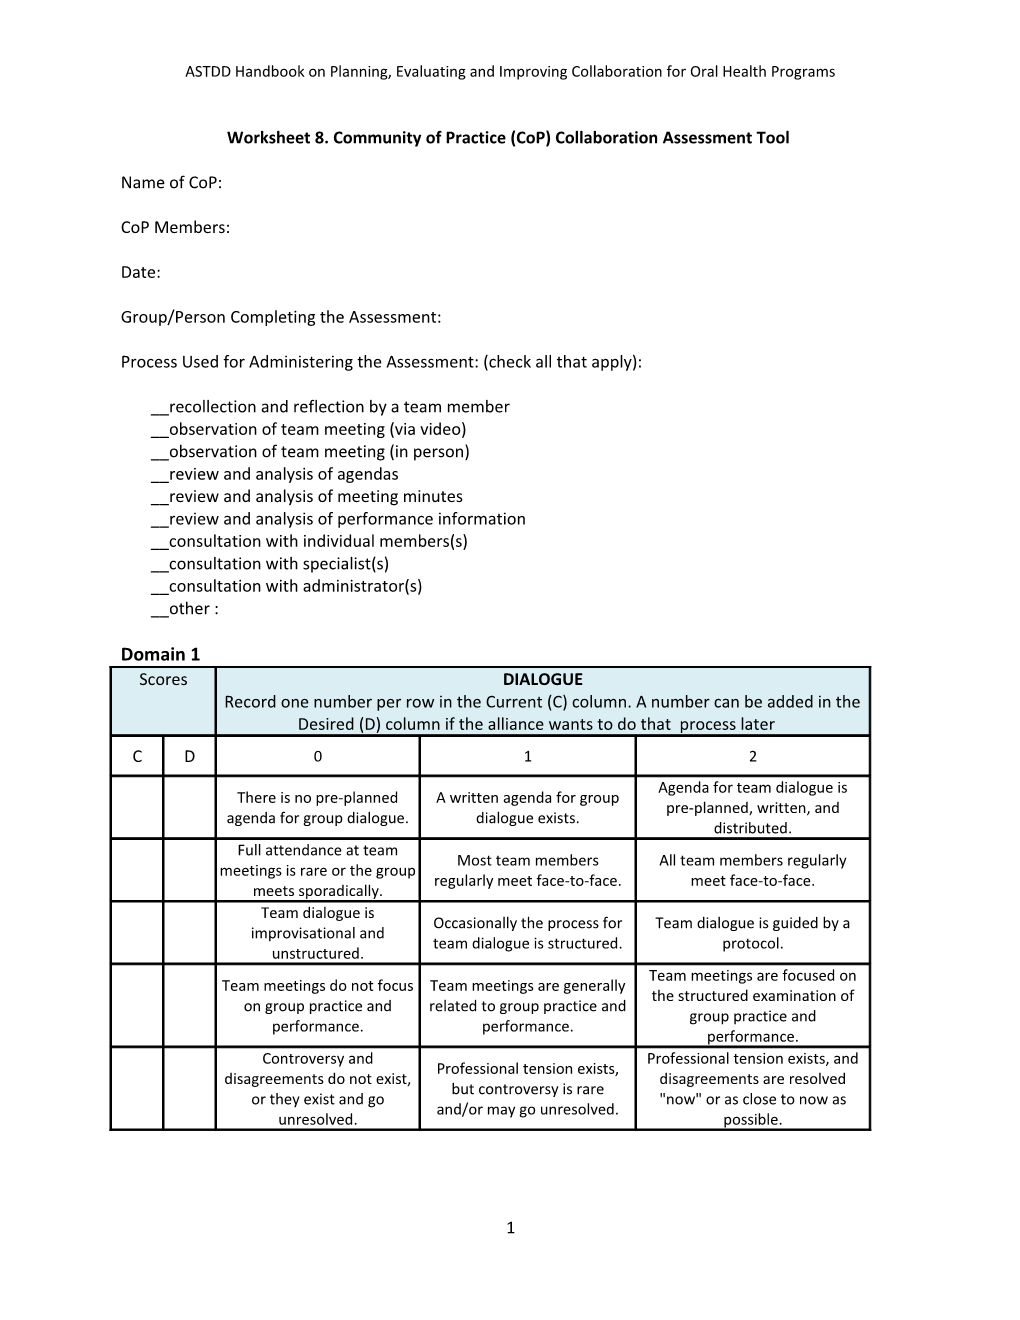 Worksheet 8. Community of Practice (Cop) Collaboration Assessment Tool